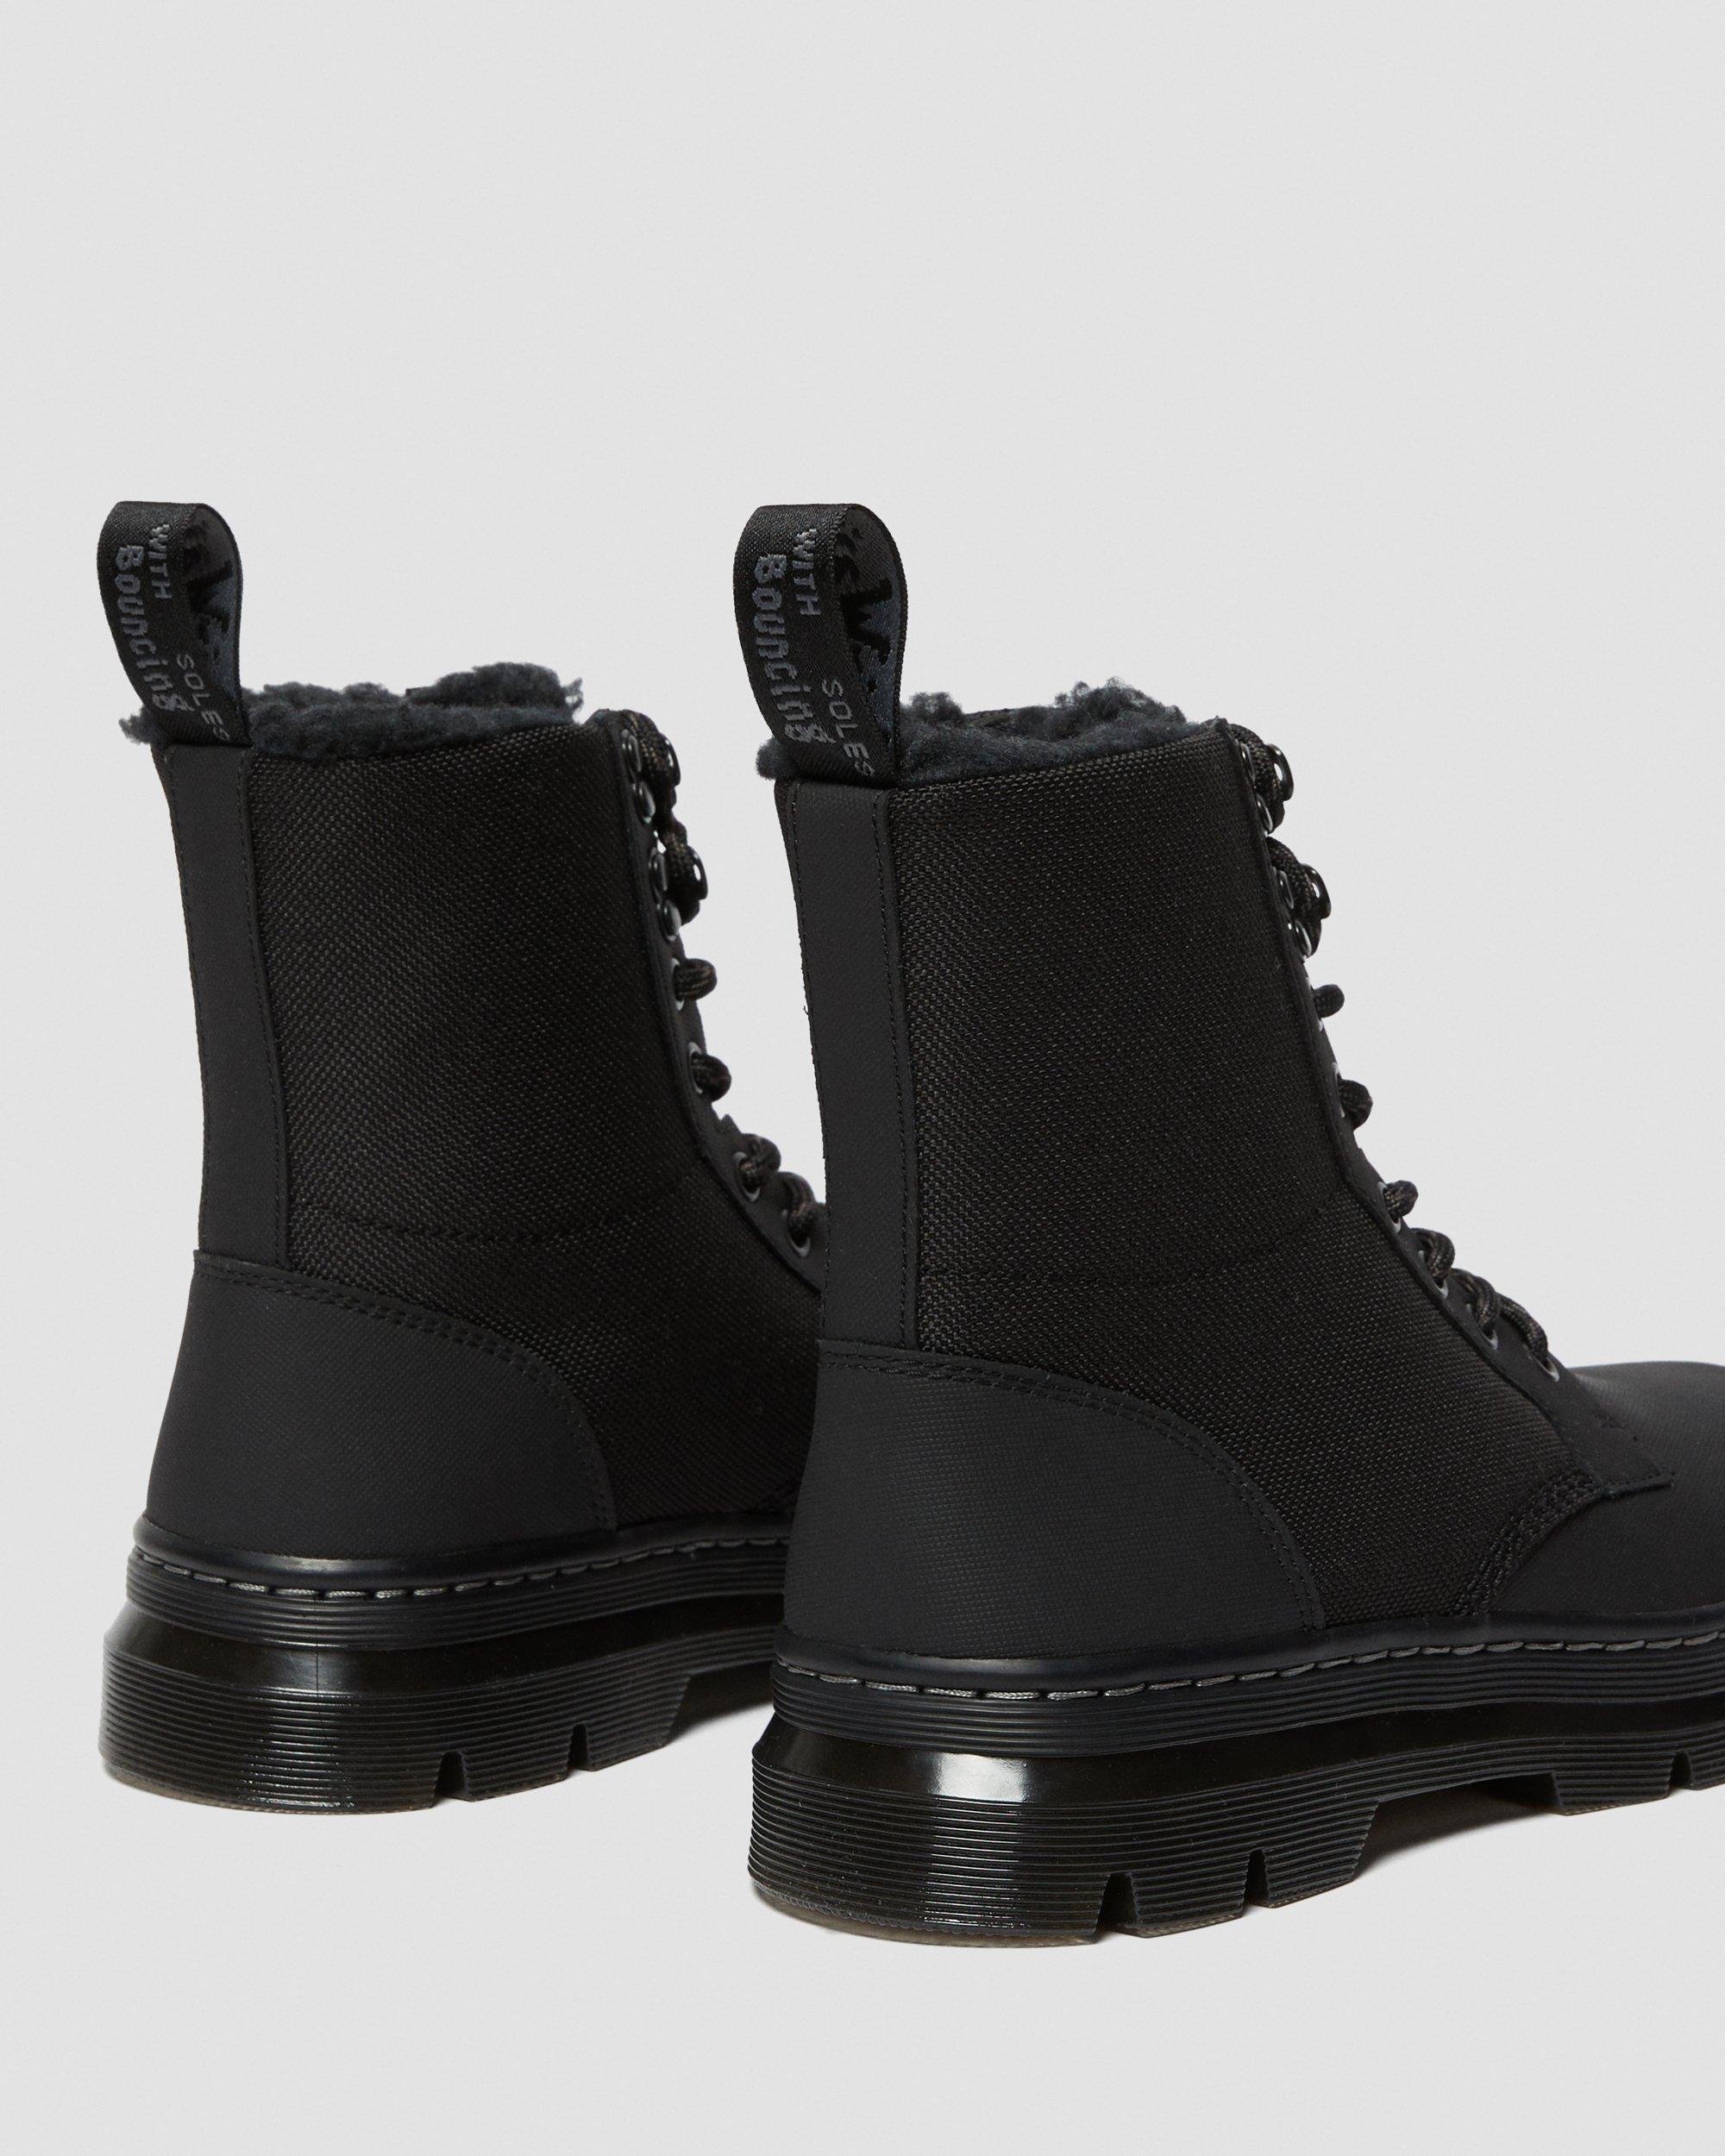 Dr. Martens Combs Fleece Lined Casual Boots in Black - Lyst